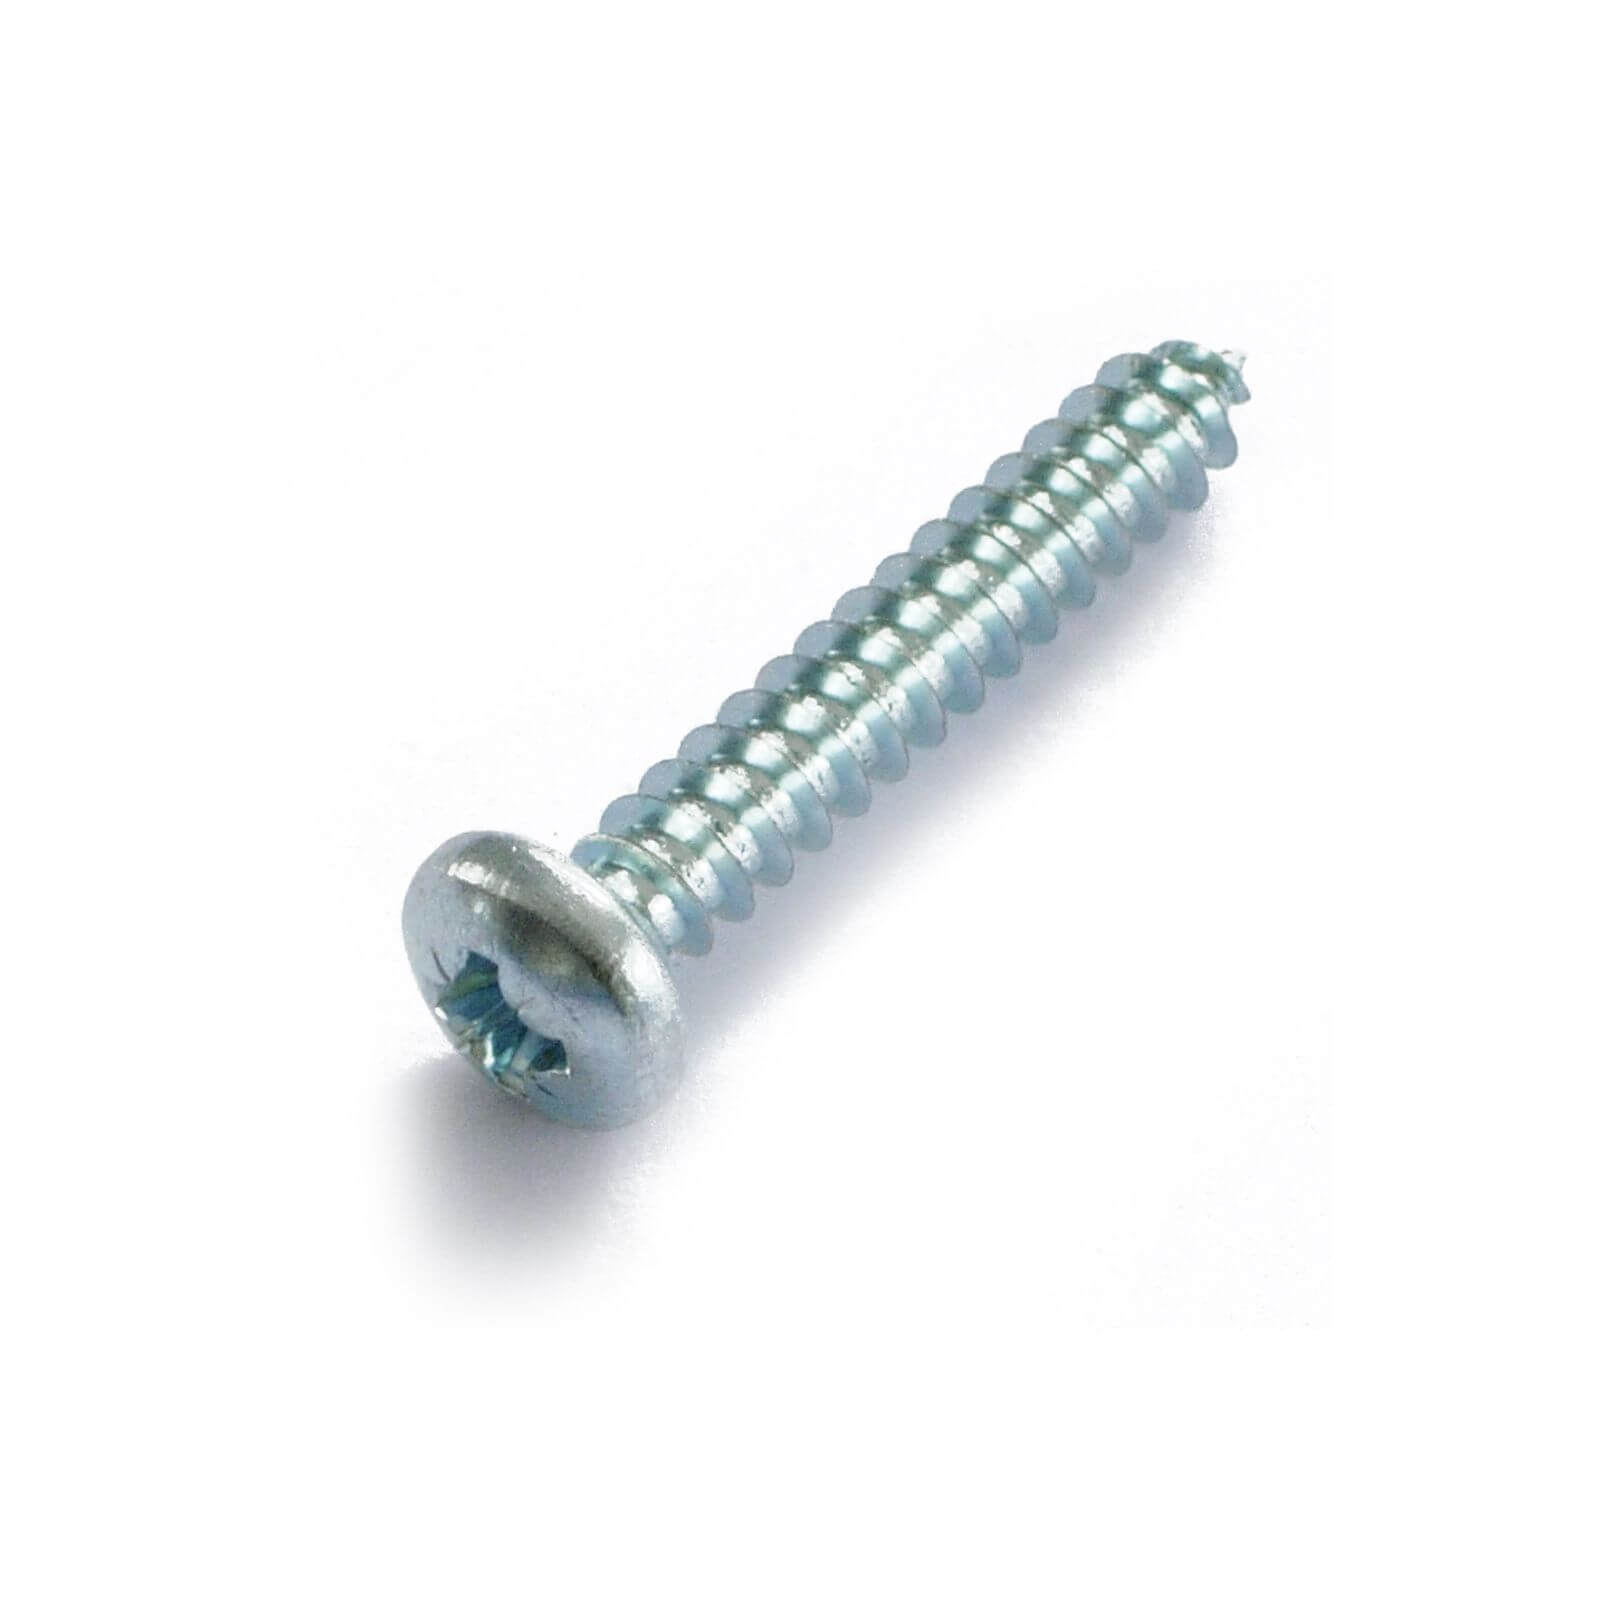 Self Tapping Screw - Bright Zinc Plated - 4 x 25mm - 10 Pack